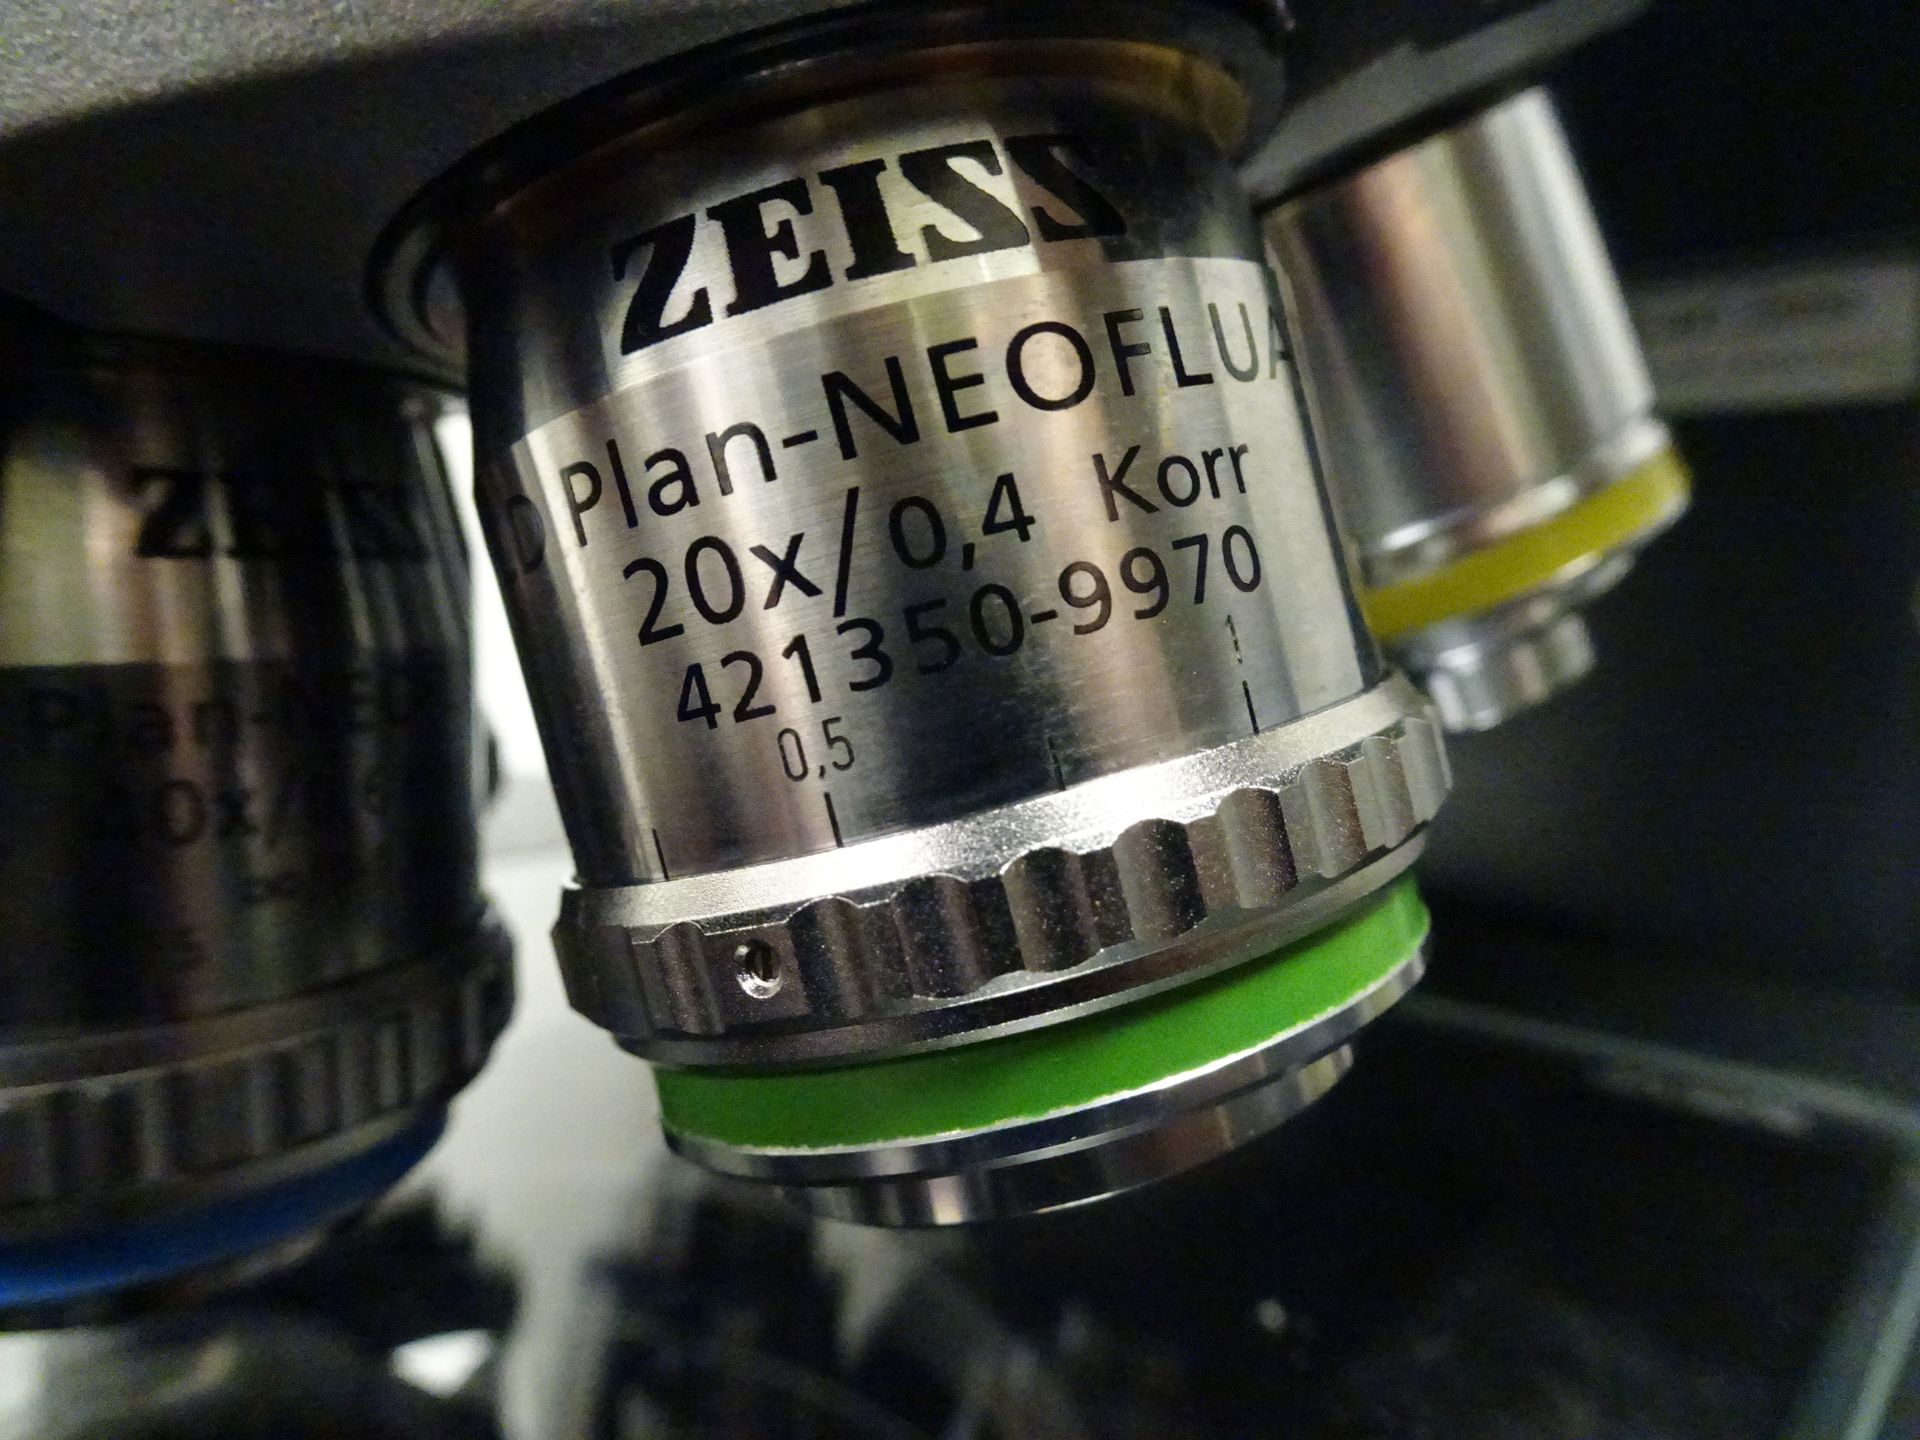 Zeiss Axio Imager.M2 Microscope With AxioCam MRM Camers With 60N-C 1" Camera Adapter, (2) 1PL 10x/23 - Image 16 of 22